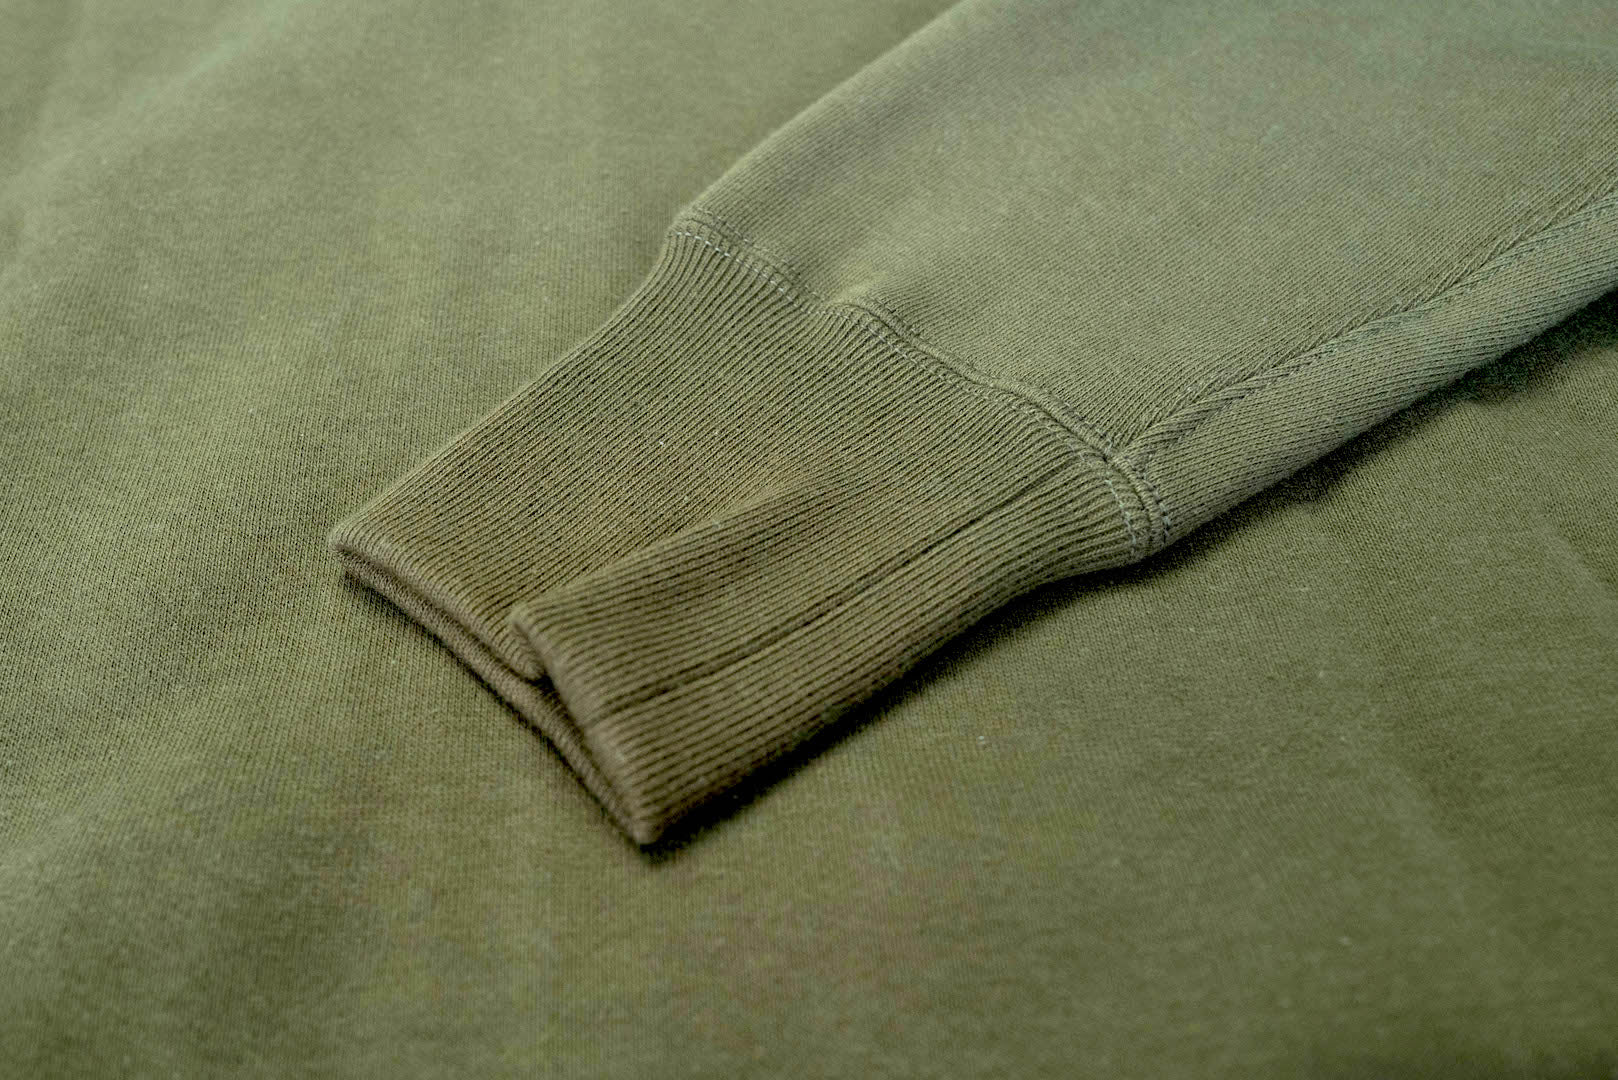 The Strike Gold x CORLECTION 12oz Loopwheeled Pull Over (Vintage Olive)